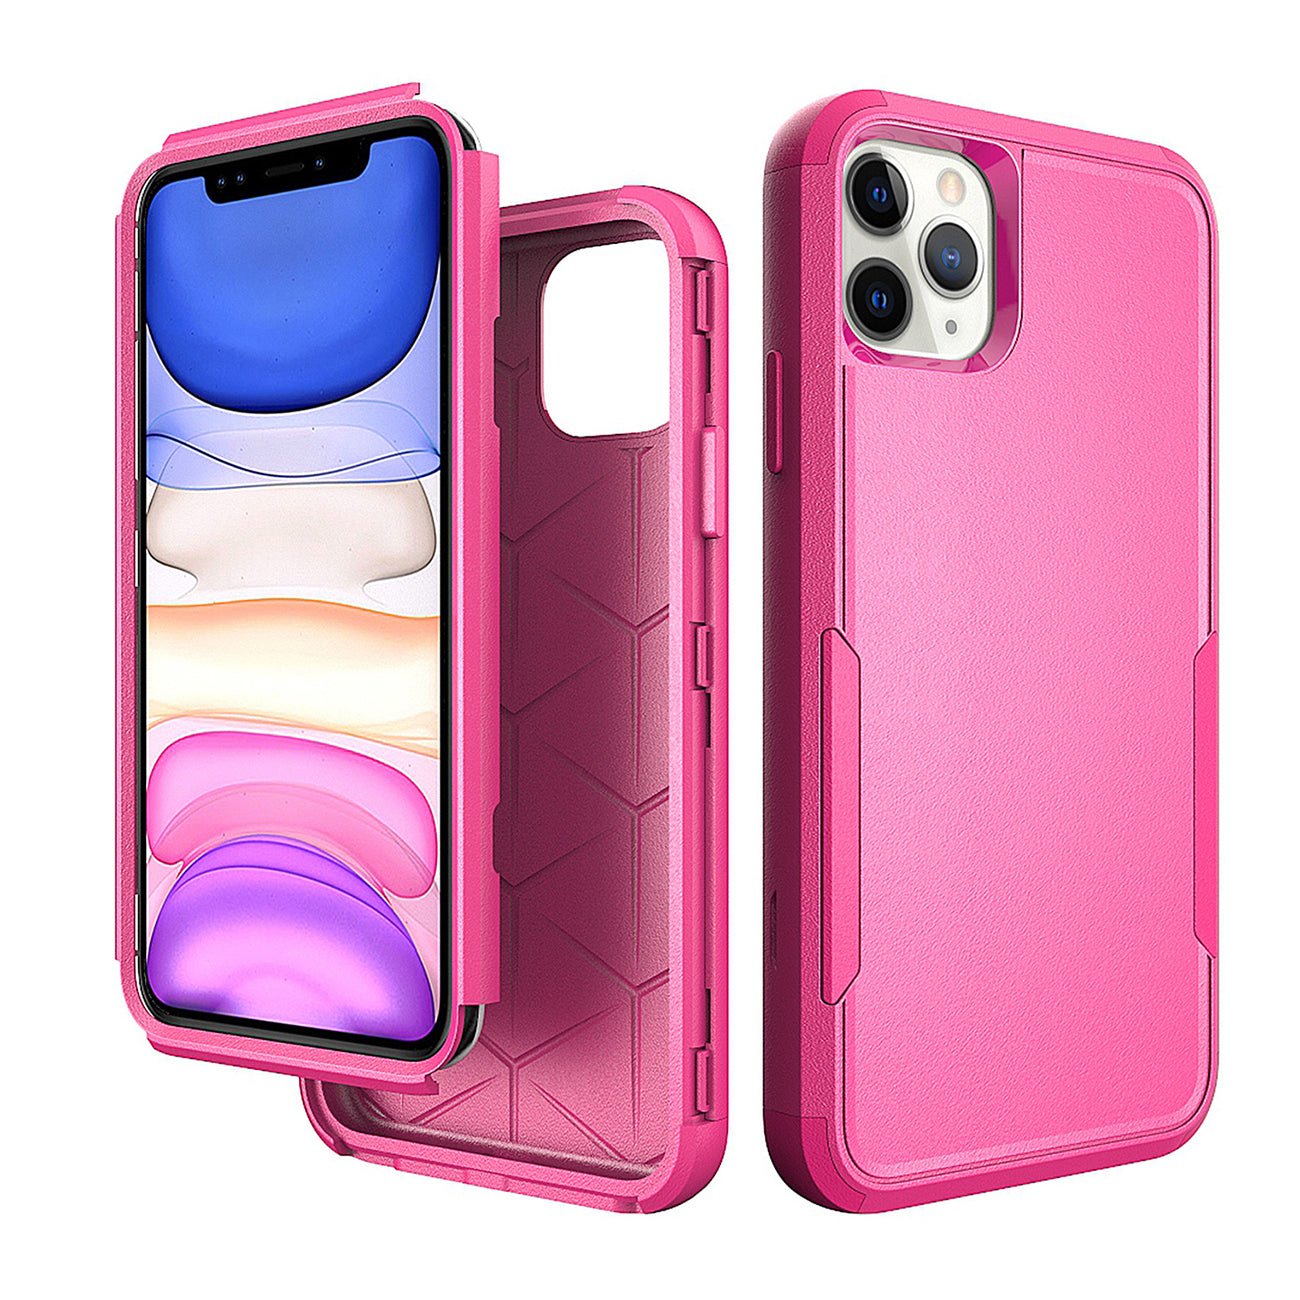 3in1 Hybrid Heavy Duty Defender Rugged Armor Case For APPLE IPHONE 11 PRO In Hot pink